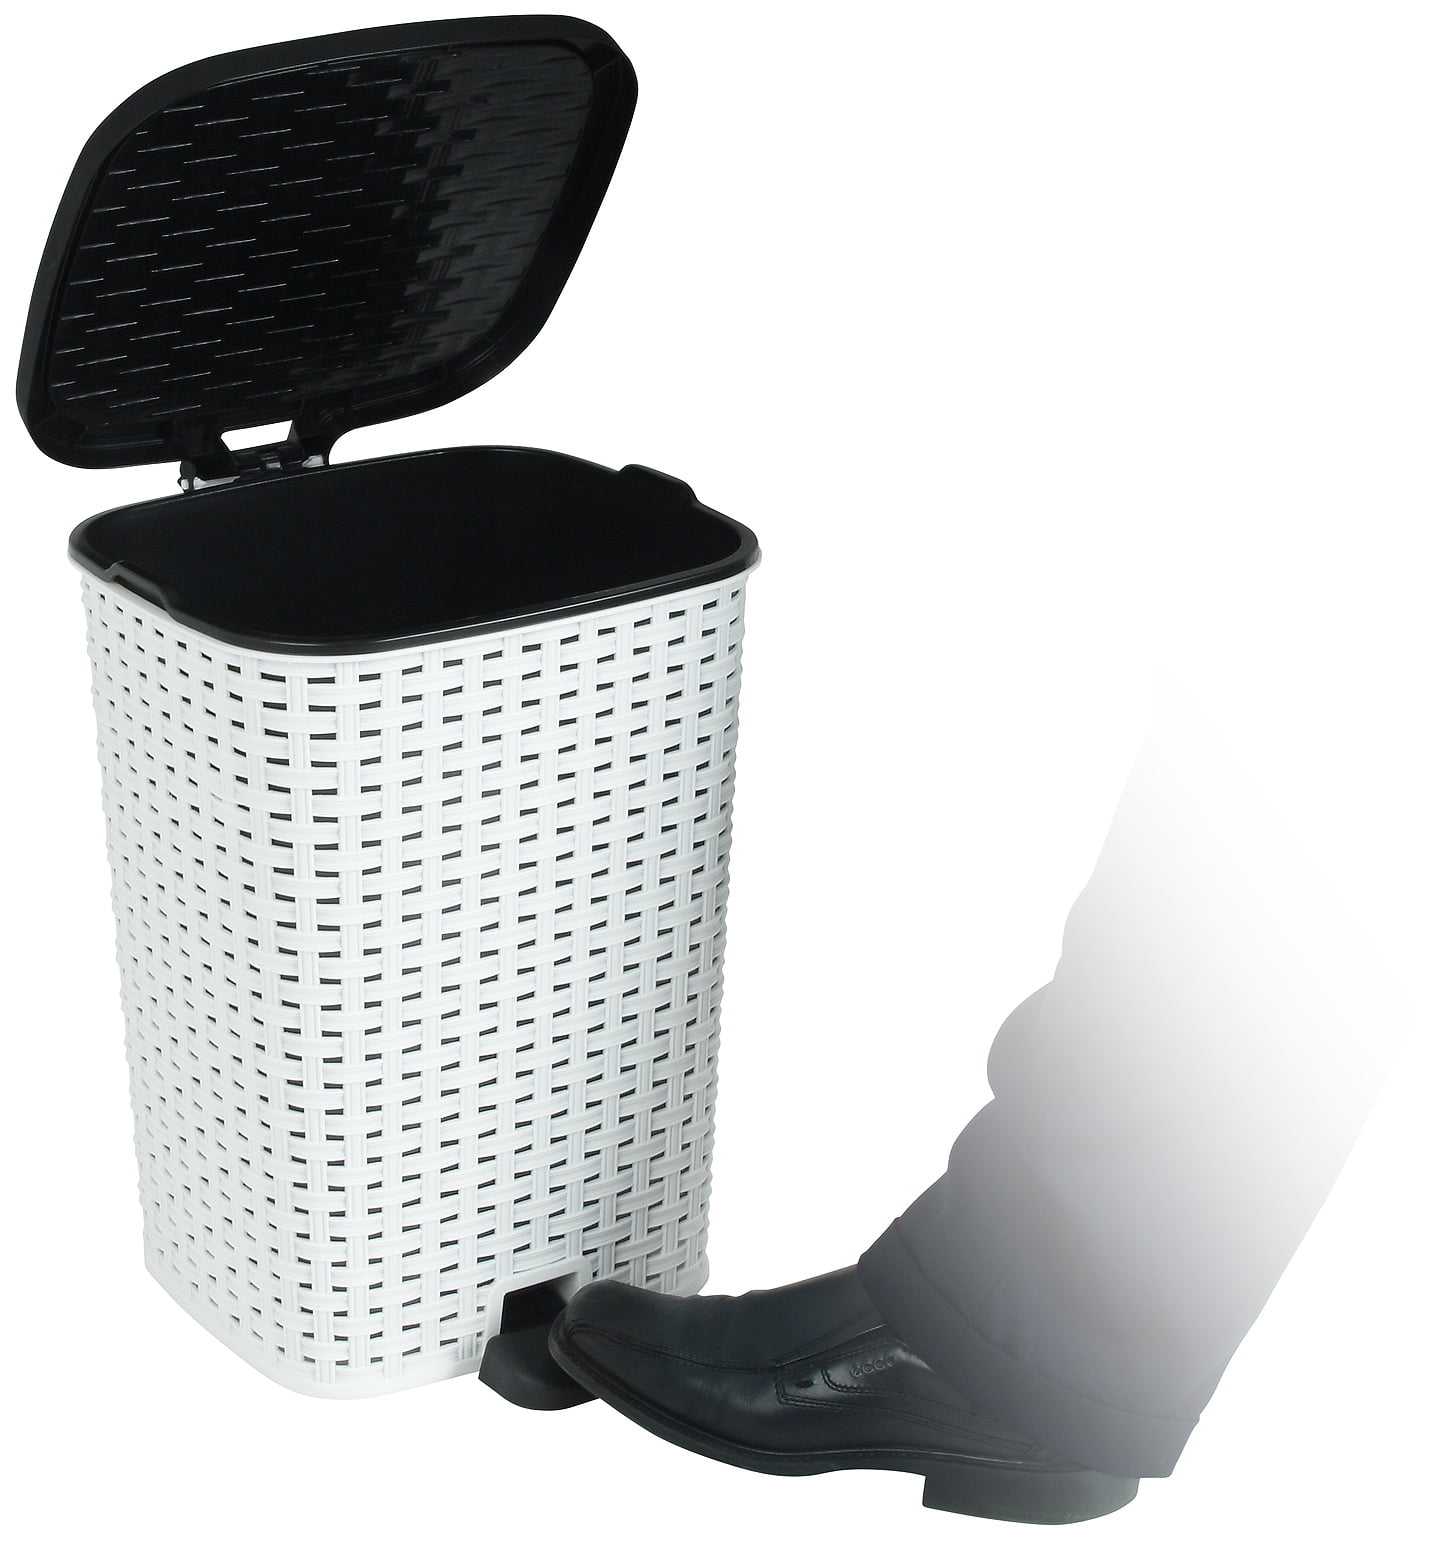 Superio Rattan Step on Trash Can 6L - Brown